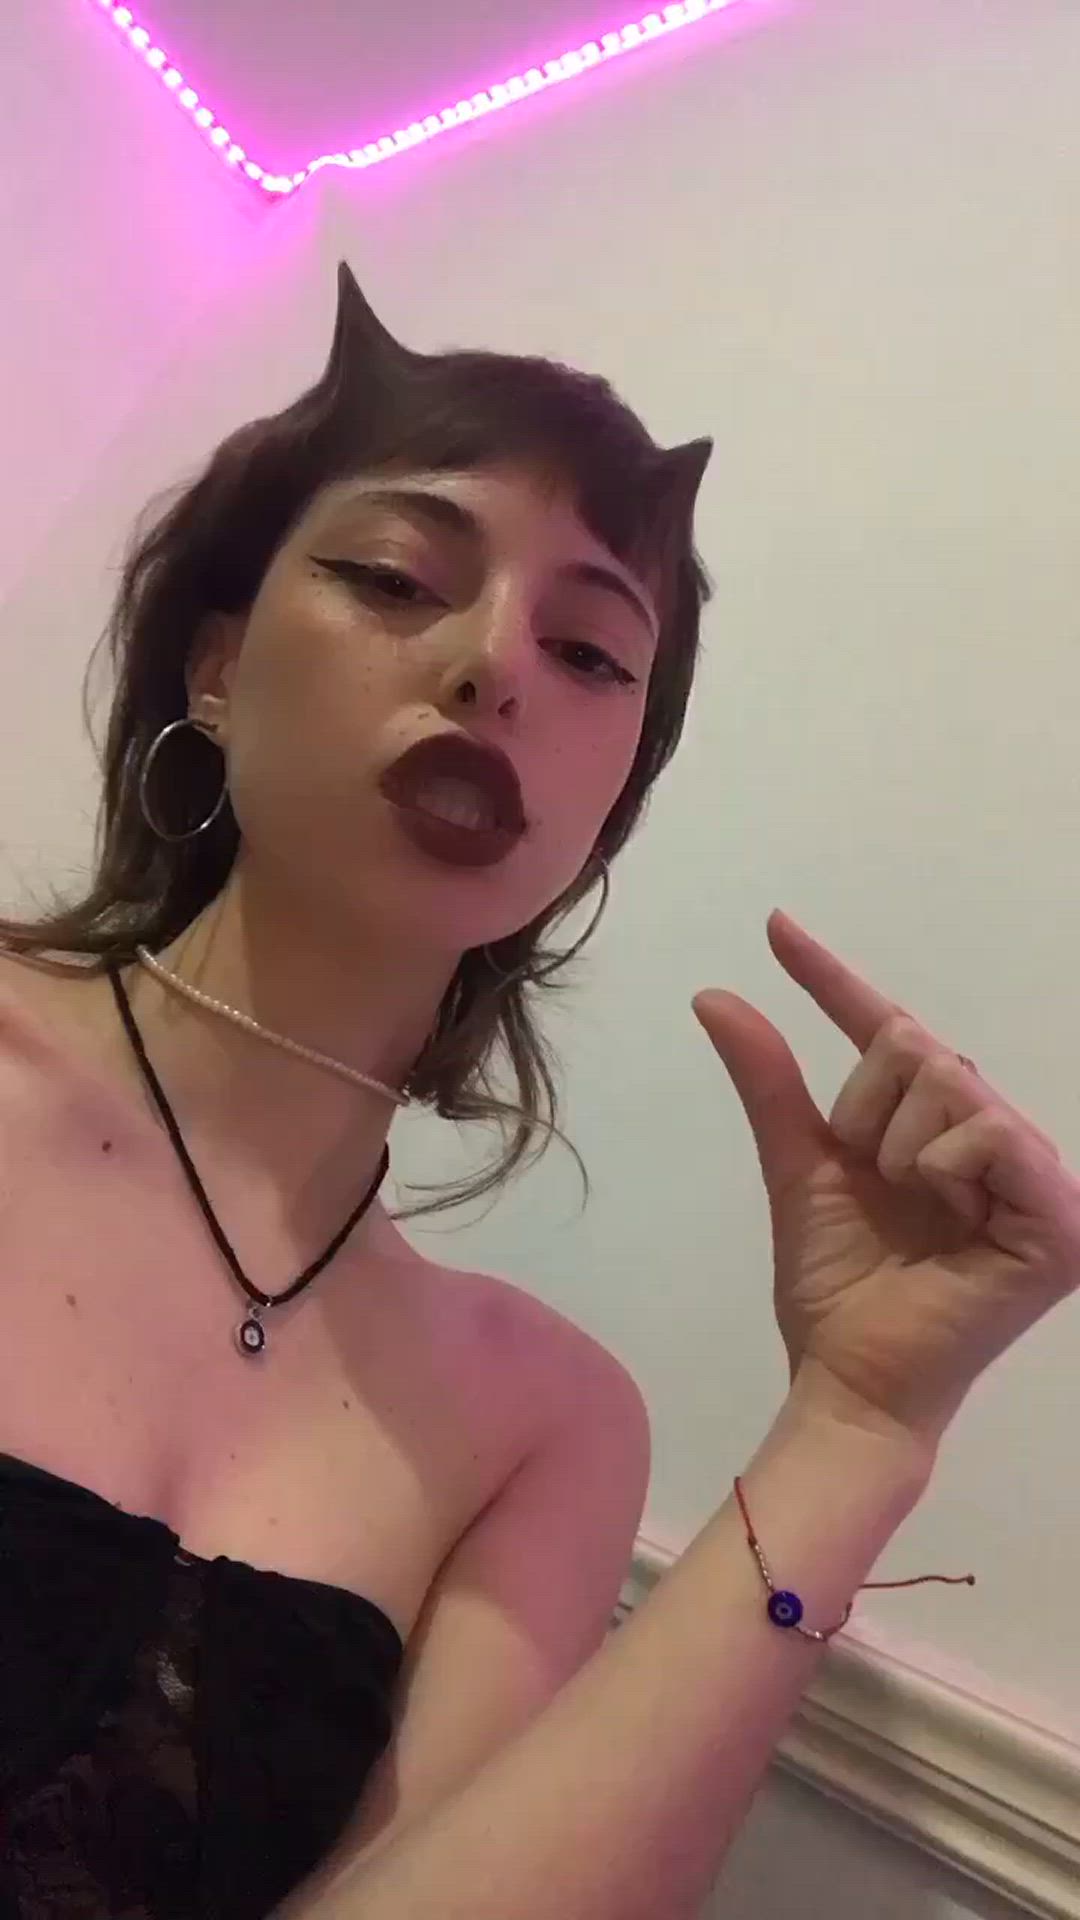 Domme porn video with onlyfans model eimiko <strong>@hoemiko</strong>